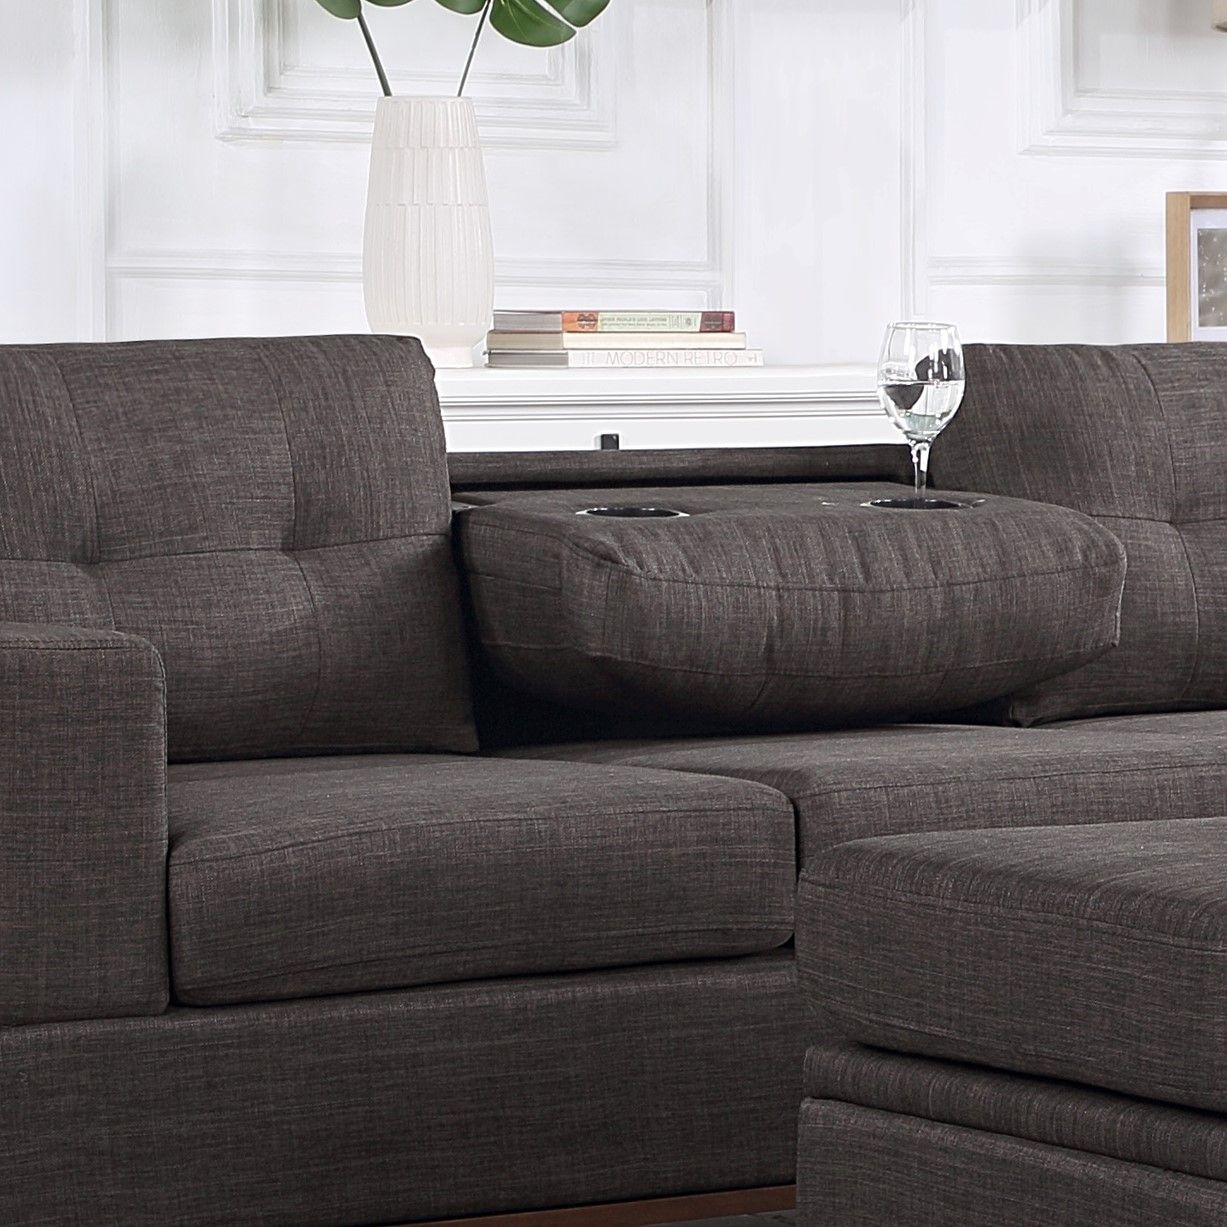 Hilo - Fabric Reversible Sectional Sofa With Dropdown Armrest, Cupholder, And Storage Ottoman